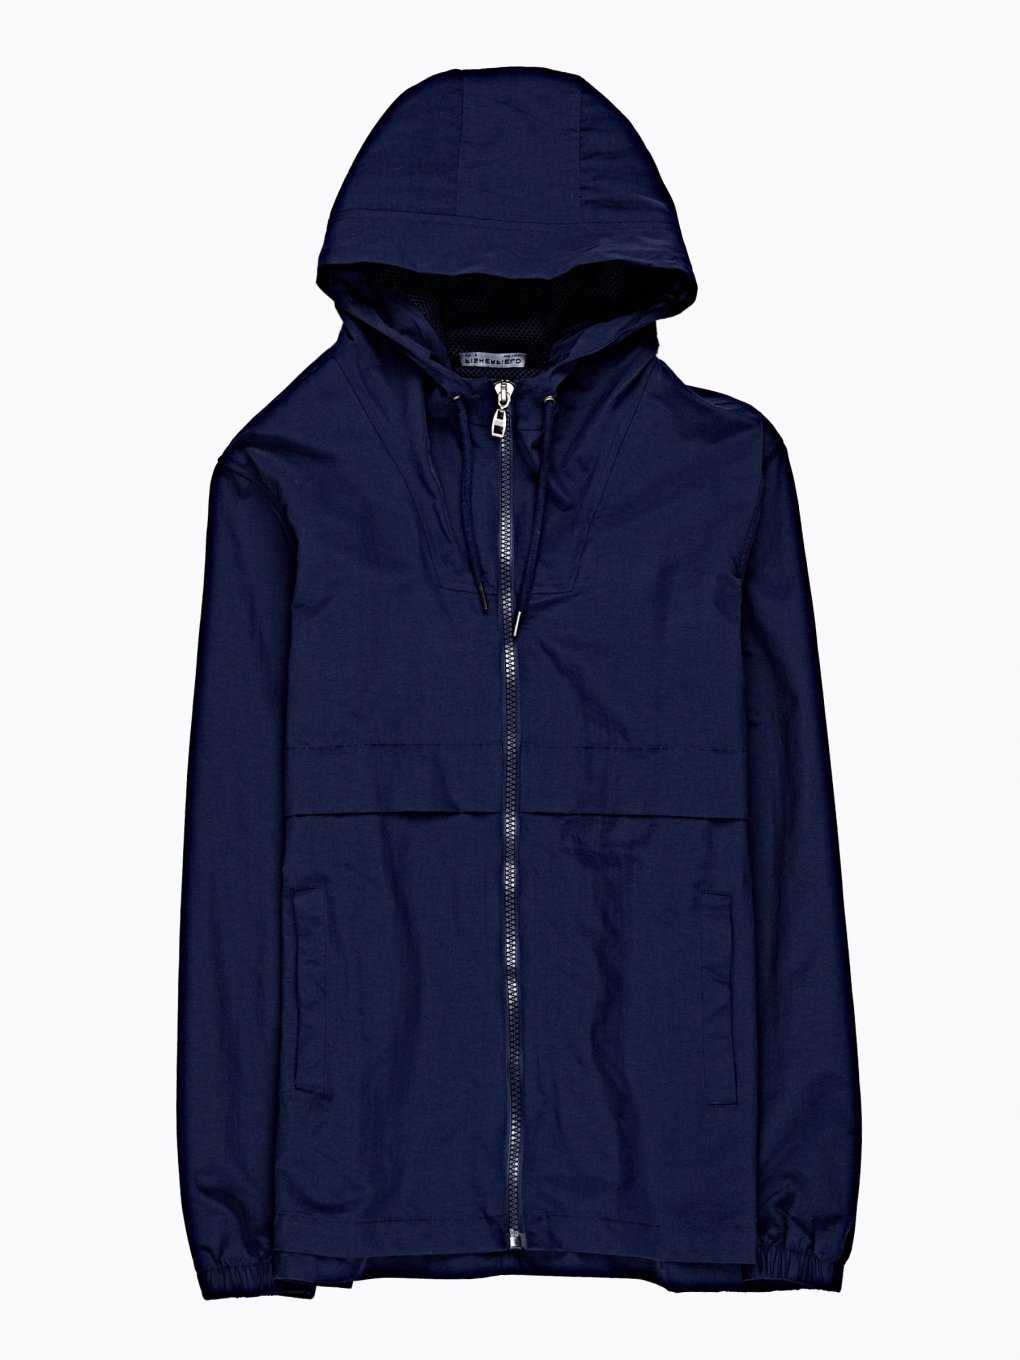 Nylon jacket with side zippers